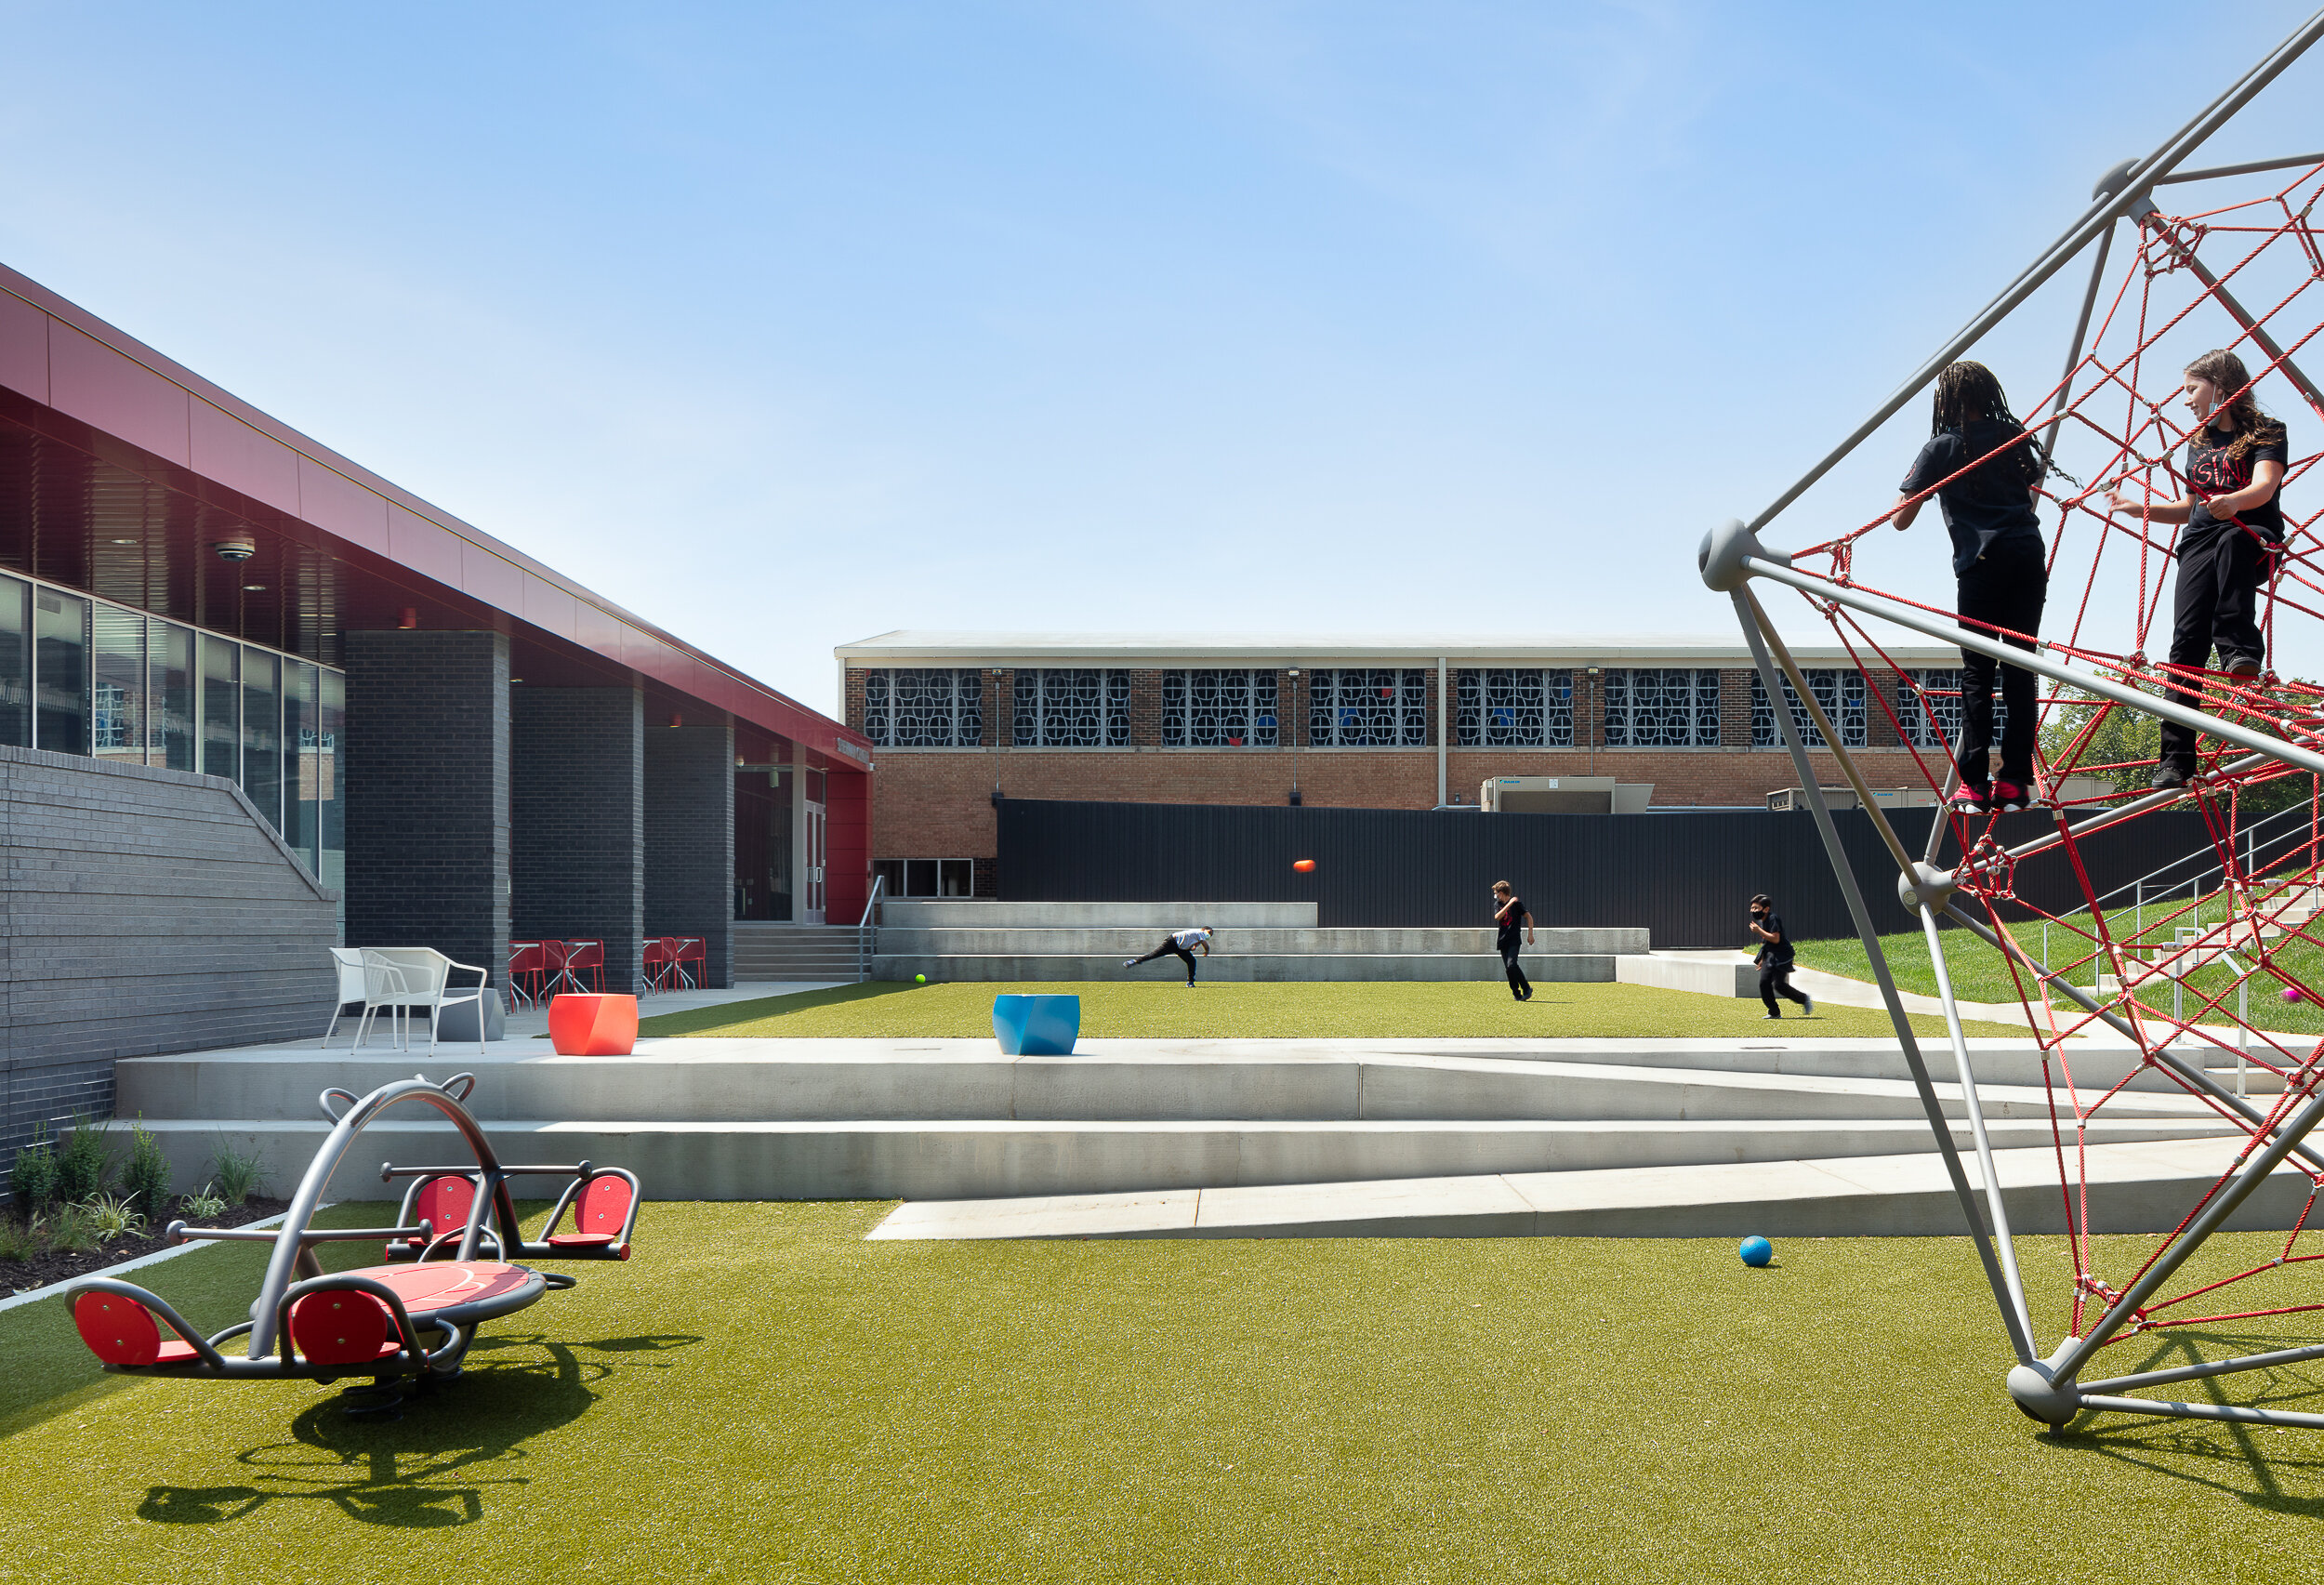  Back exterior, turf and play equipment w/ old building in the background. 